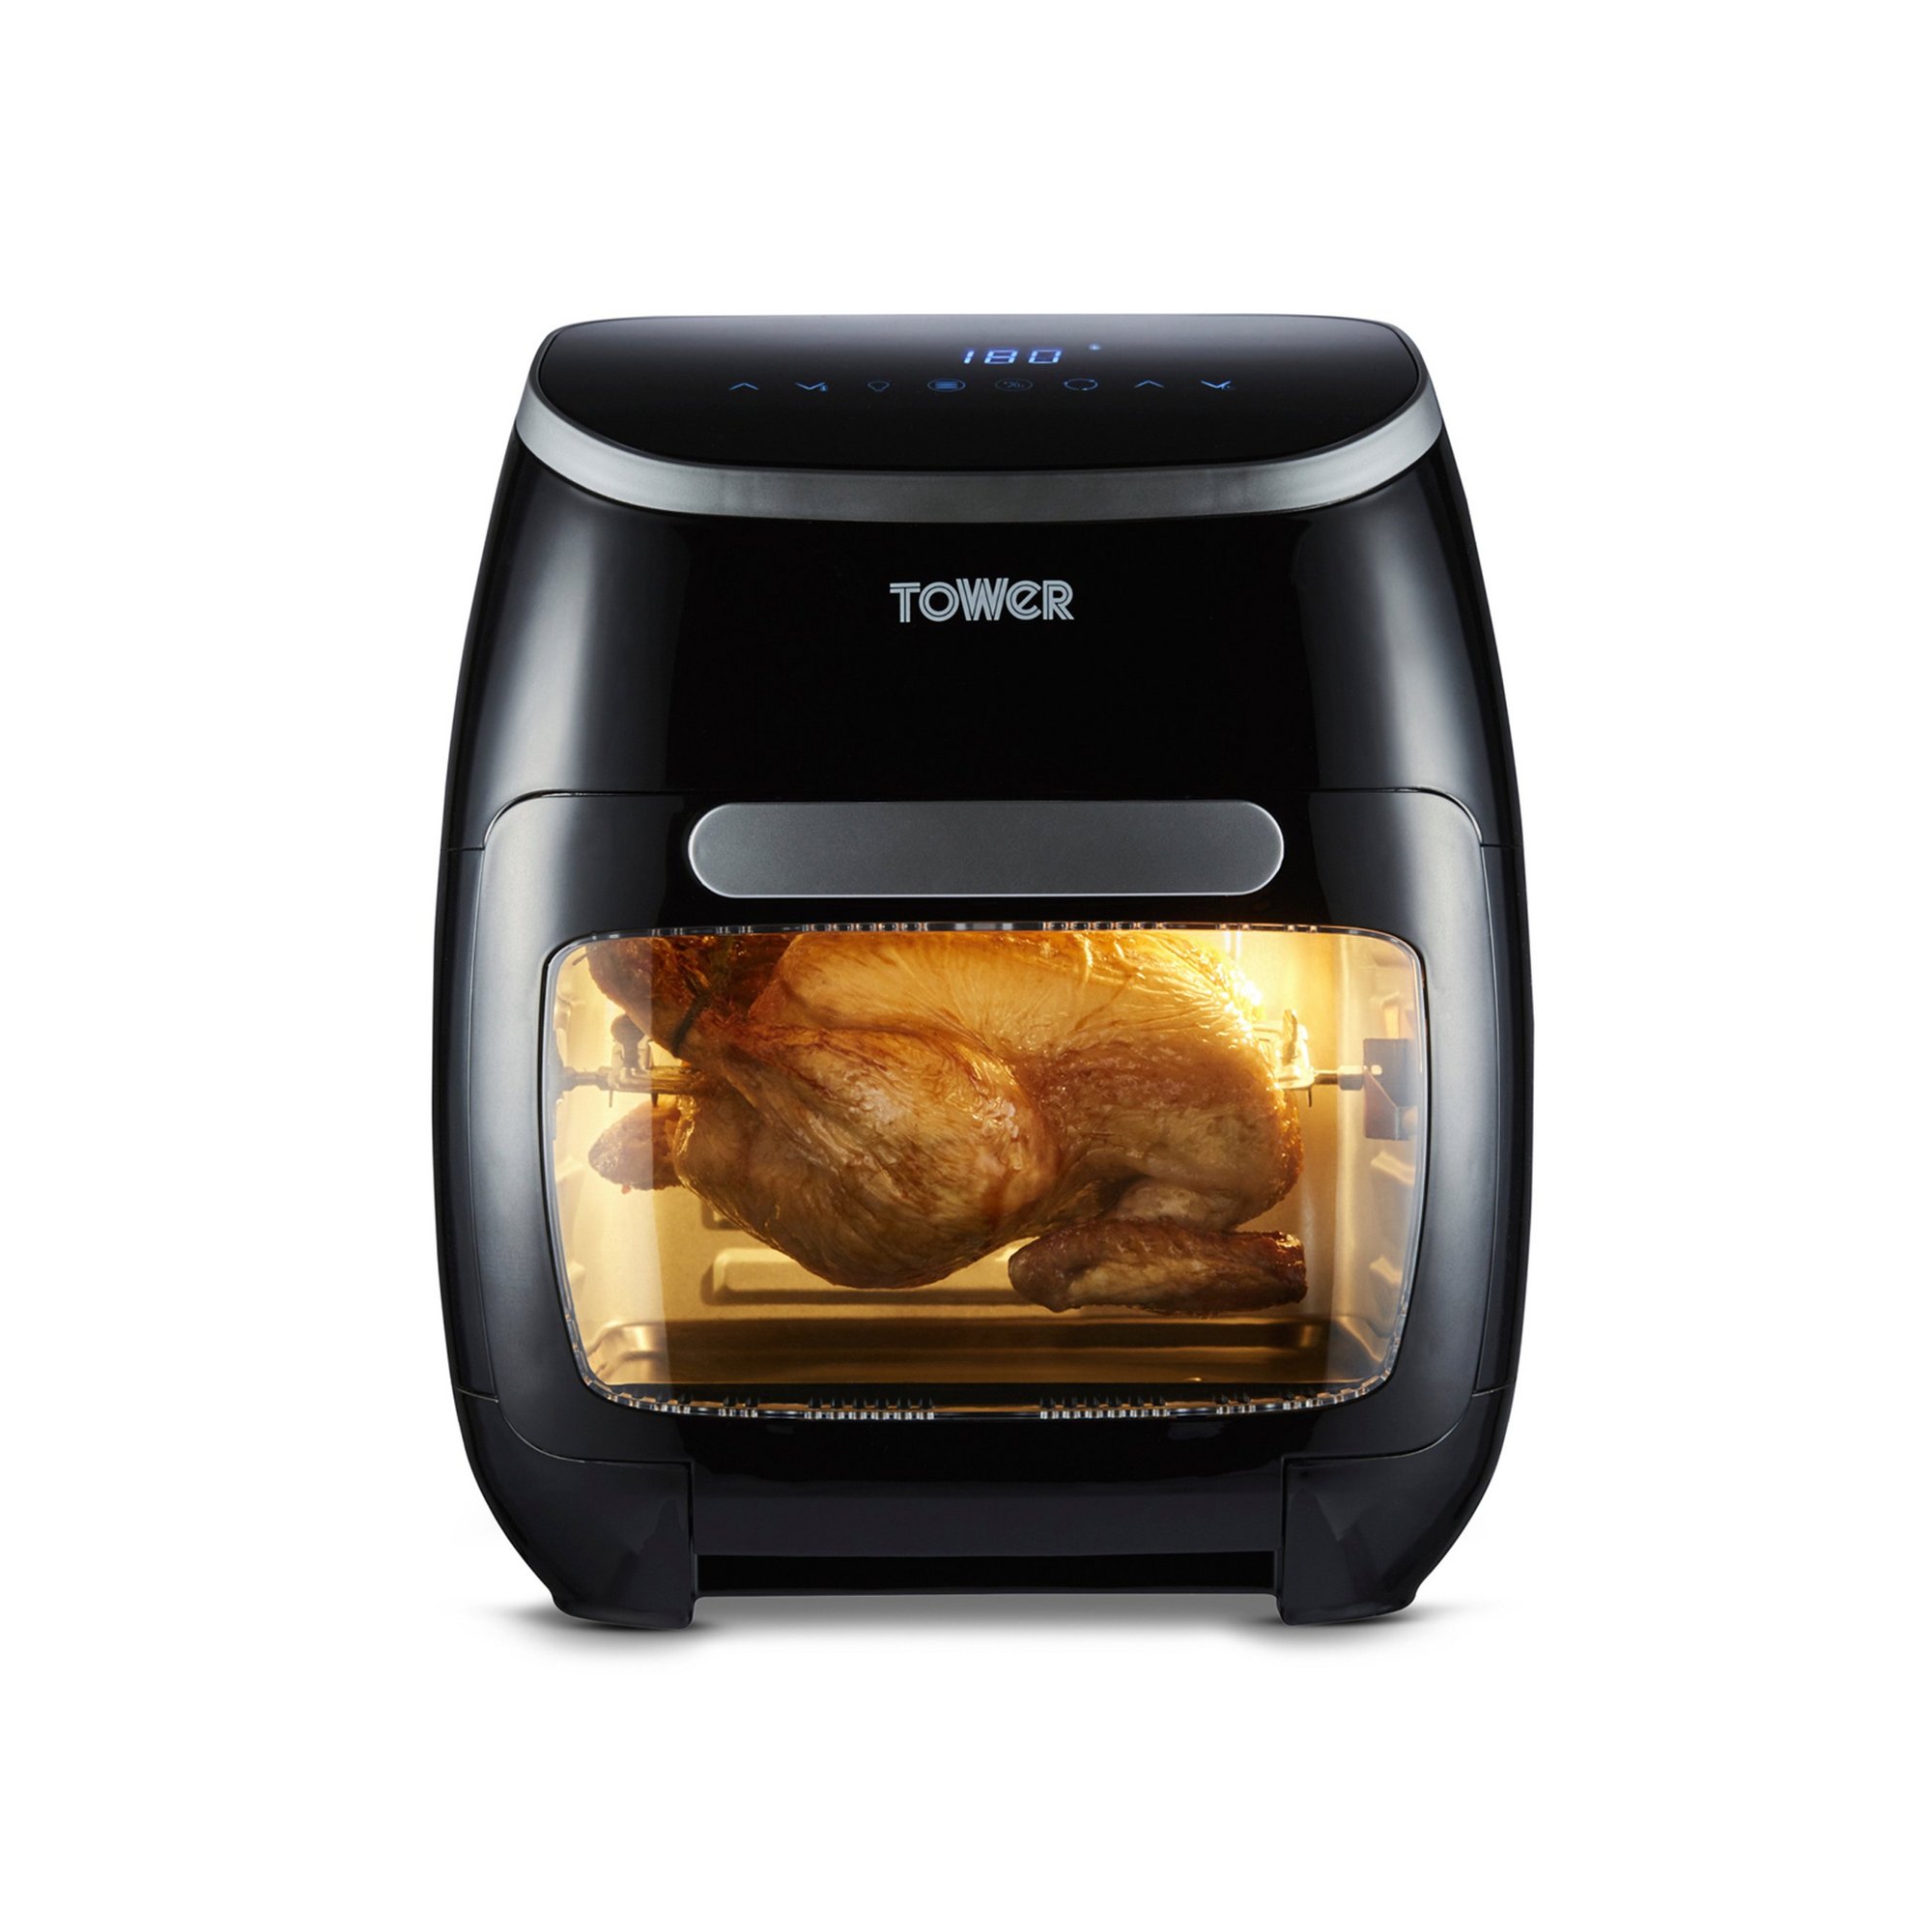 Tower 5-in-1 Express Pro 11 Litre Digital Air Fryer Oven